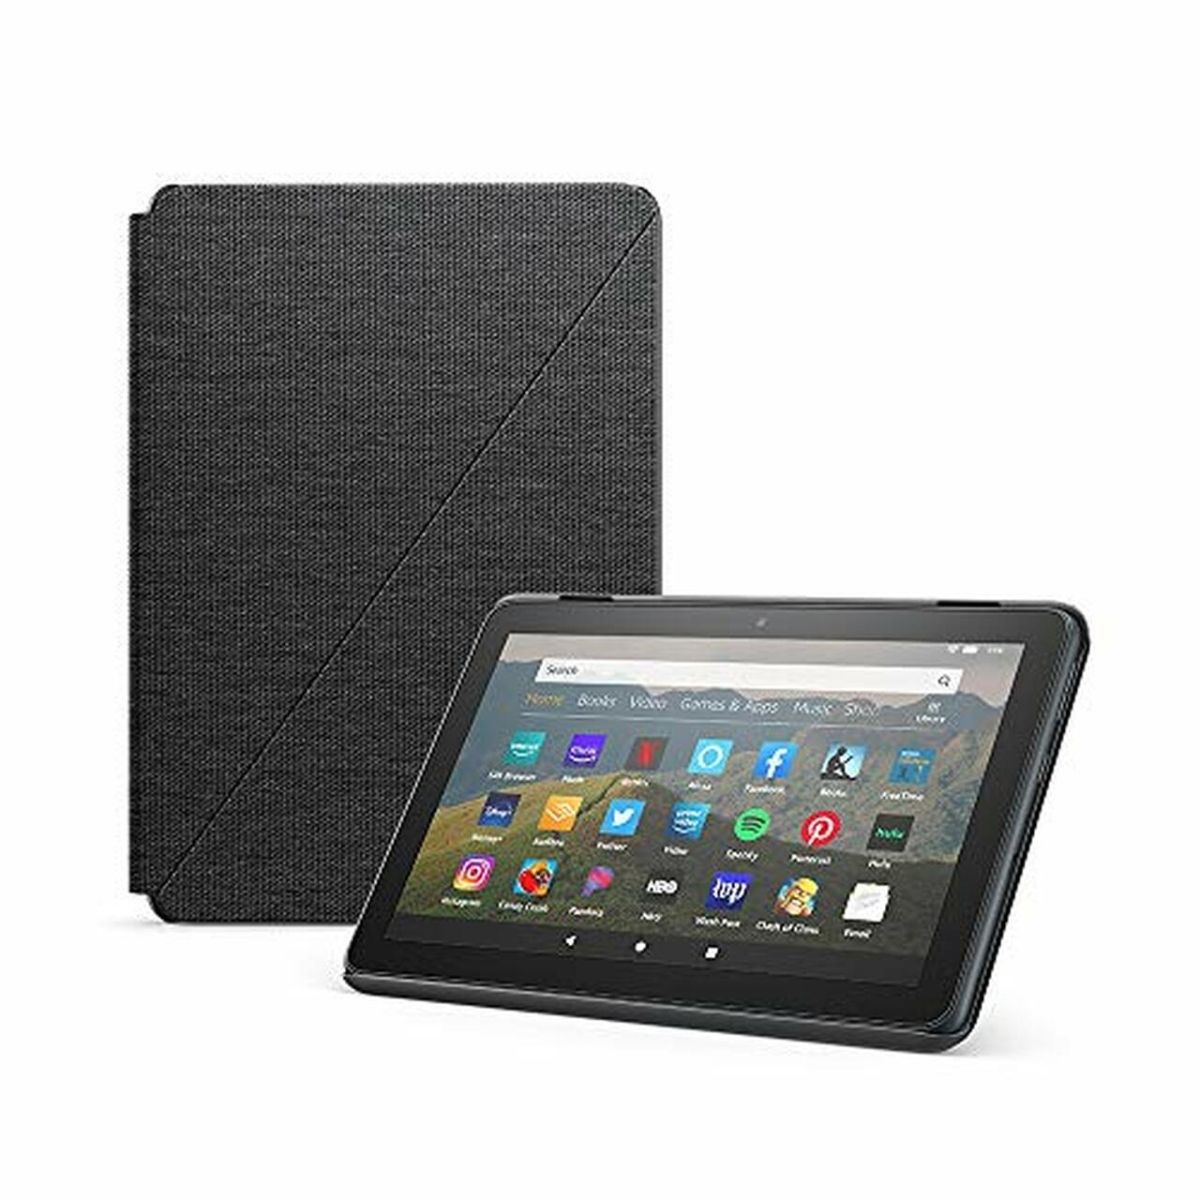 Cover Case for Amazon Fire HD 8 (10th Generation - 2020 release) - Charcoal Black